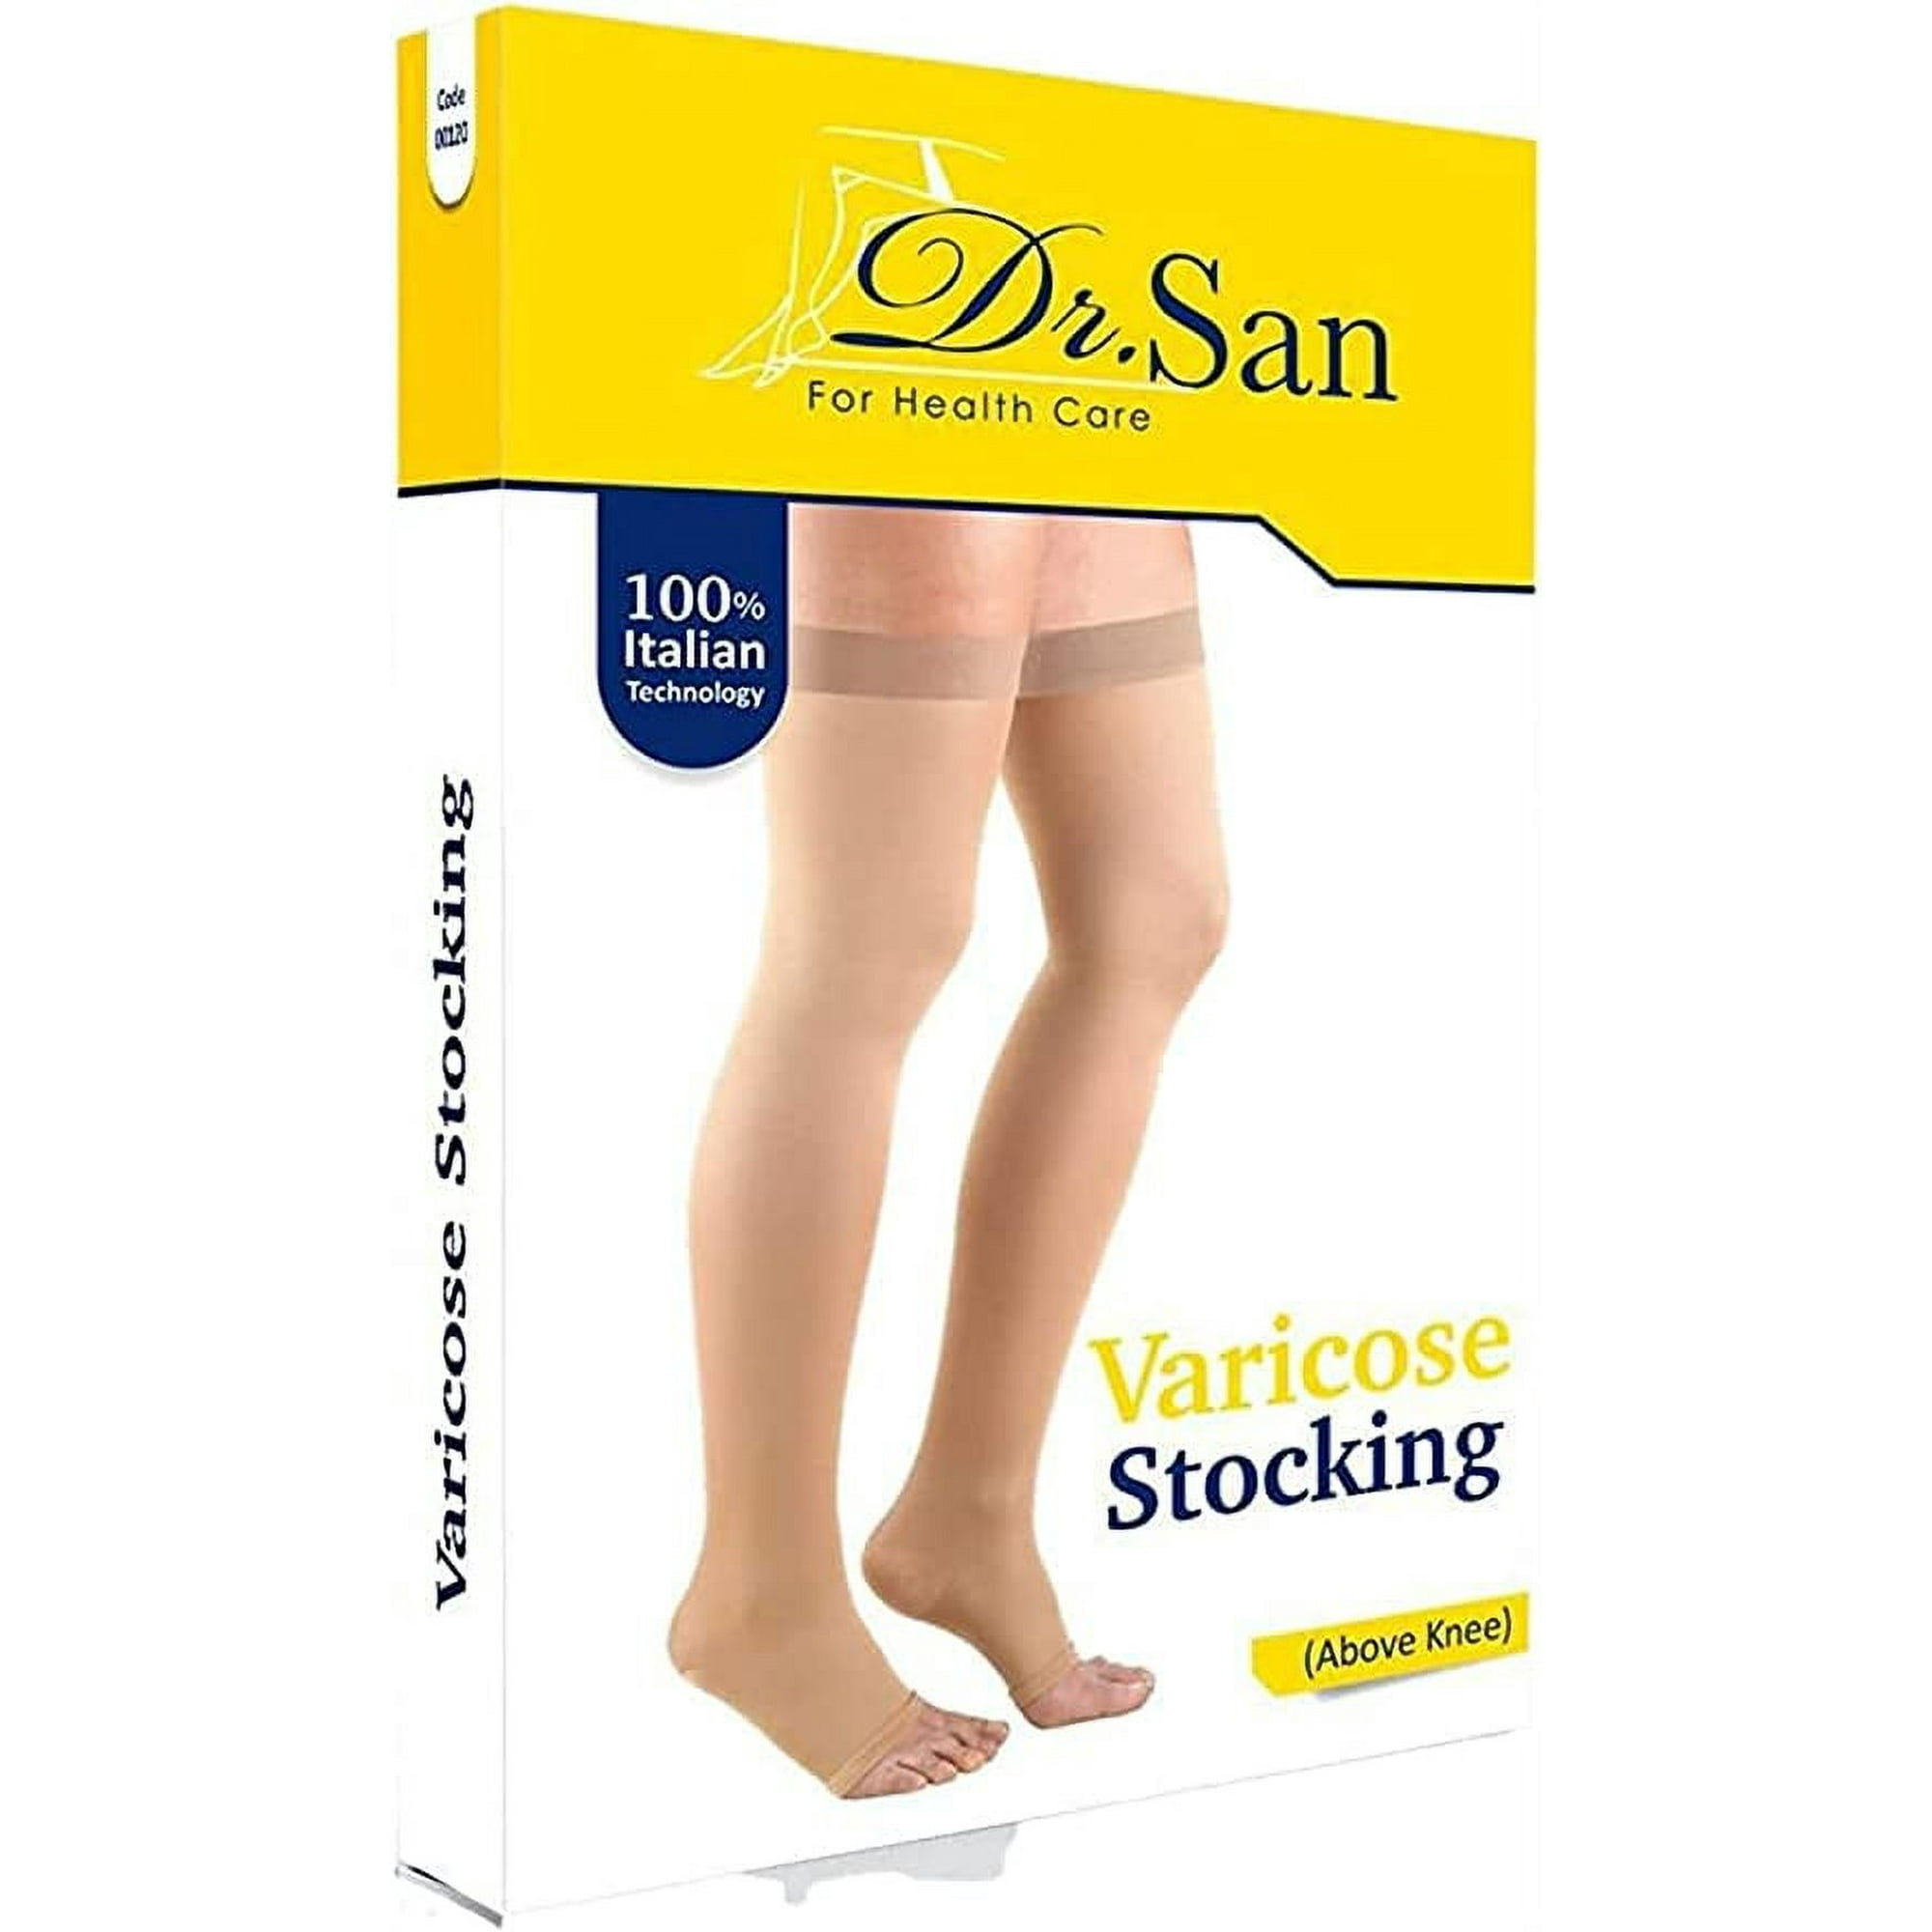 Dr. San Knee High Compression Socks 20-30mmHg Firm Support, Opaque, Unisex, Maternity Pregnancy, Varicose Veins, Swelling, Pain Relief, Shin Splint, Above Size Extra Large 2 - Walmart.com